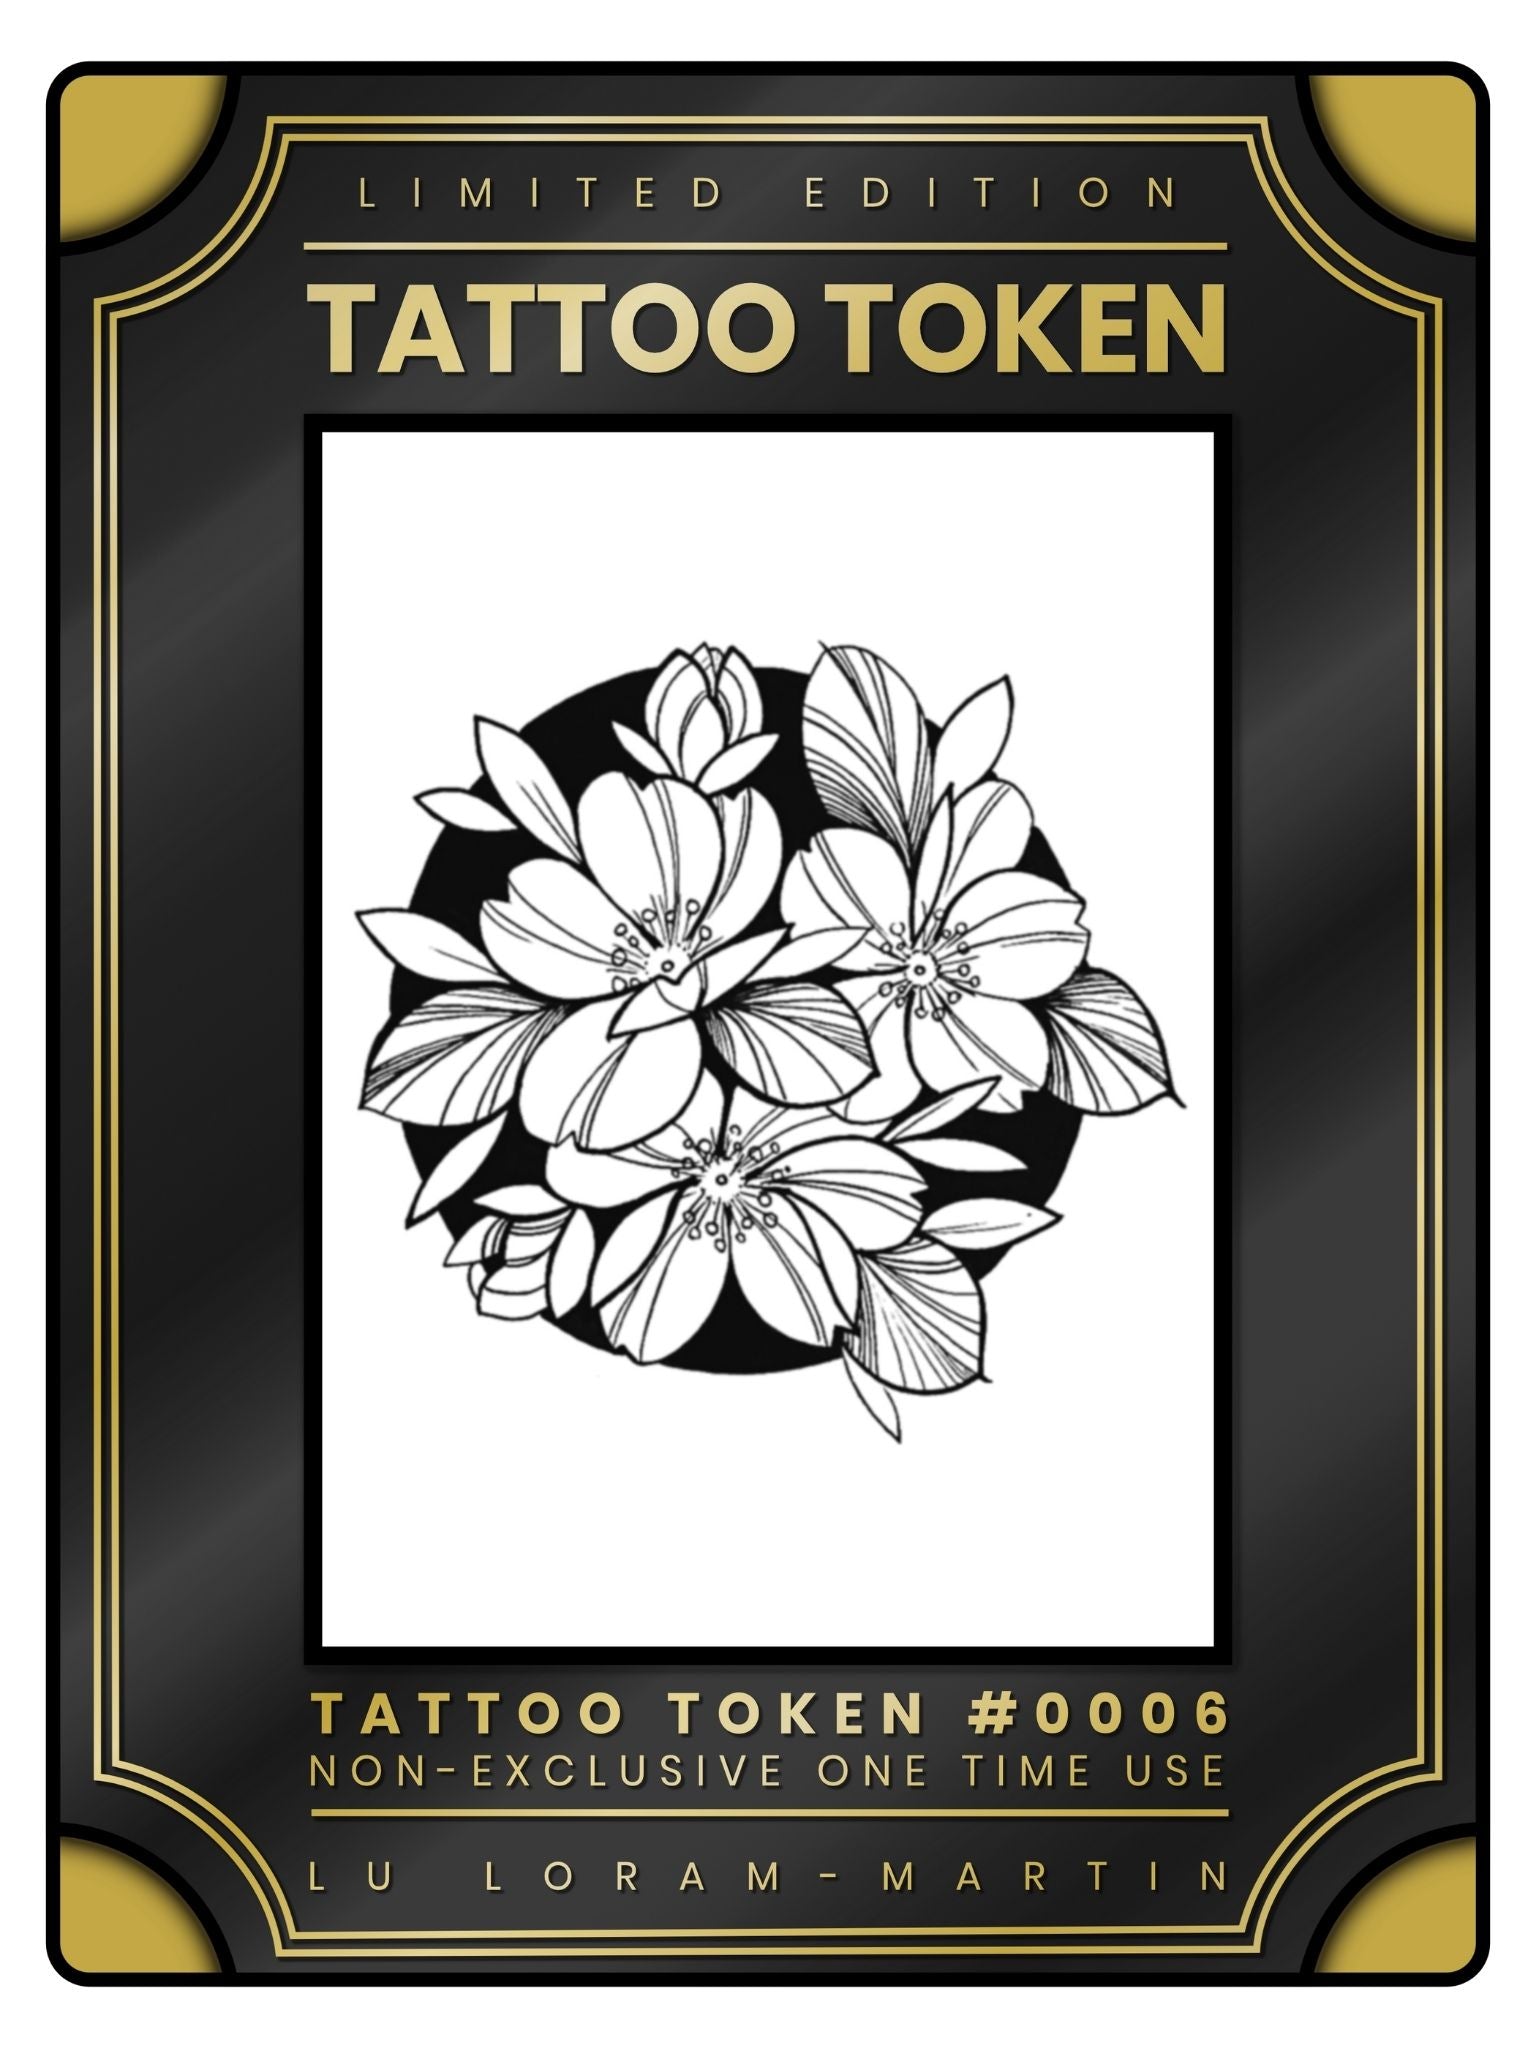 Cherry blossom circle tattoo token design in black line work and shading, illustrated by female floral tattoo artist Lu Loram Martin, Toronto, Canada